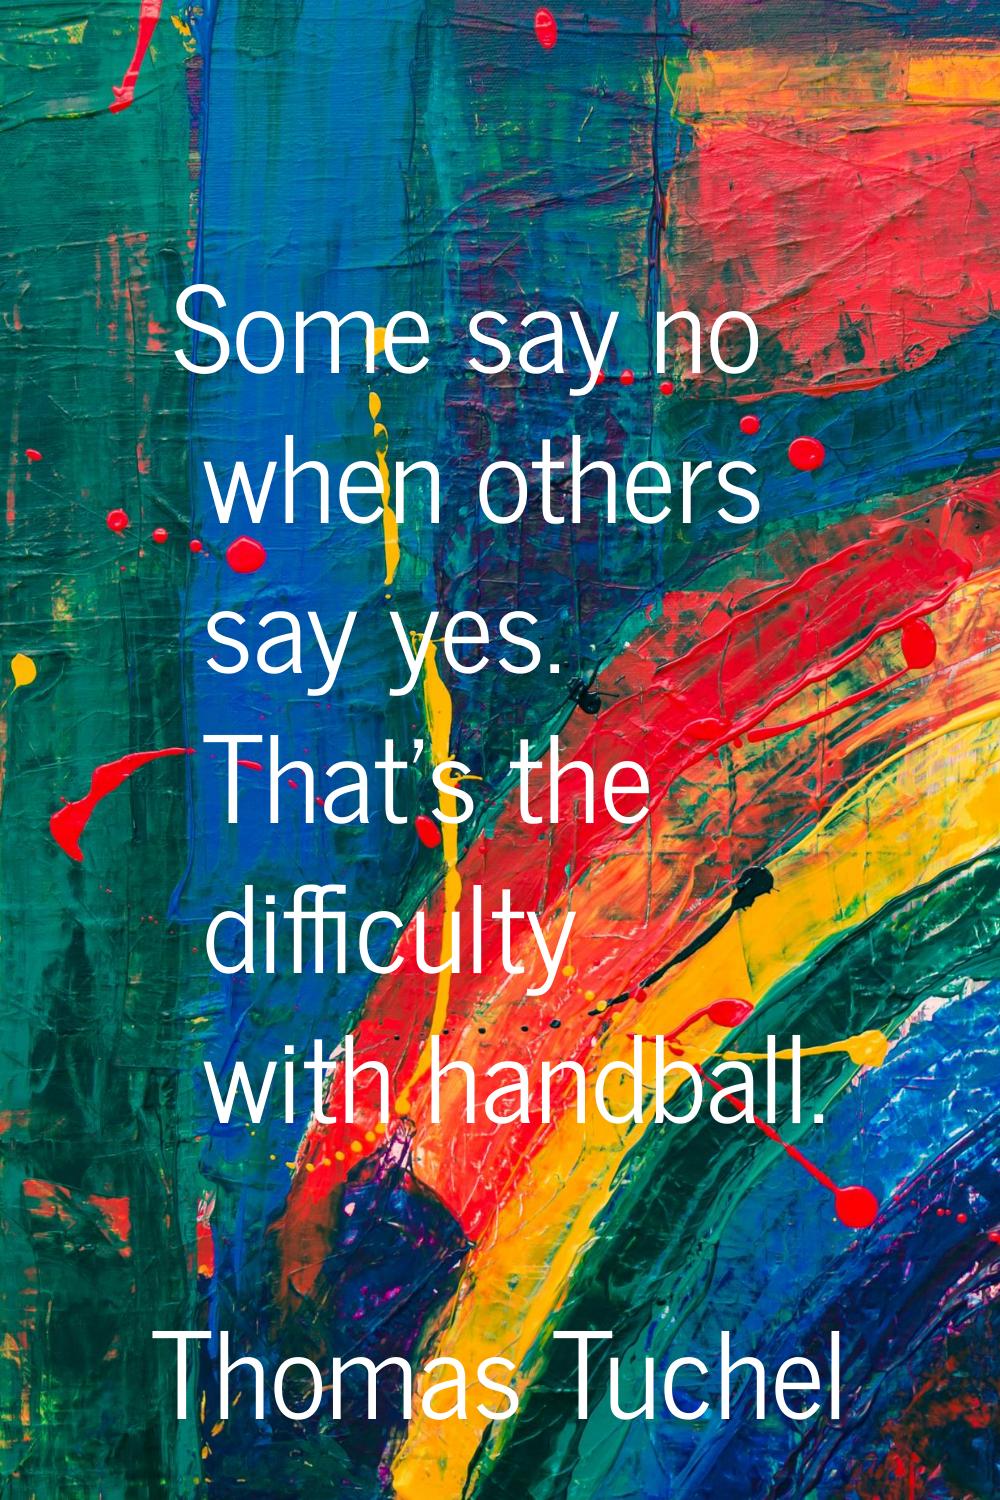 Some say no when others say yes. That's the difficulty with handball.